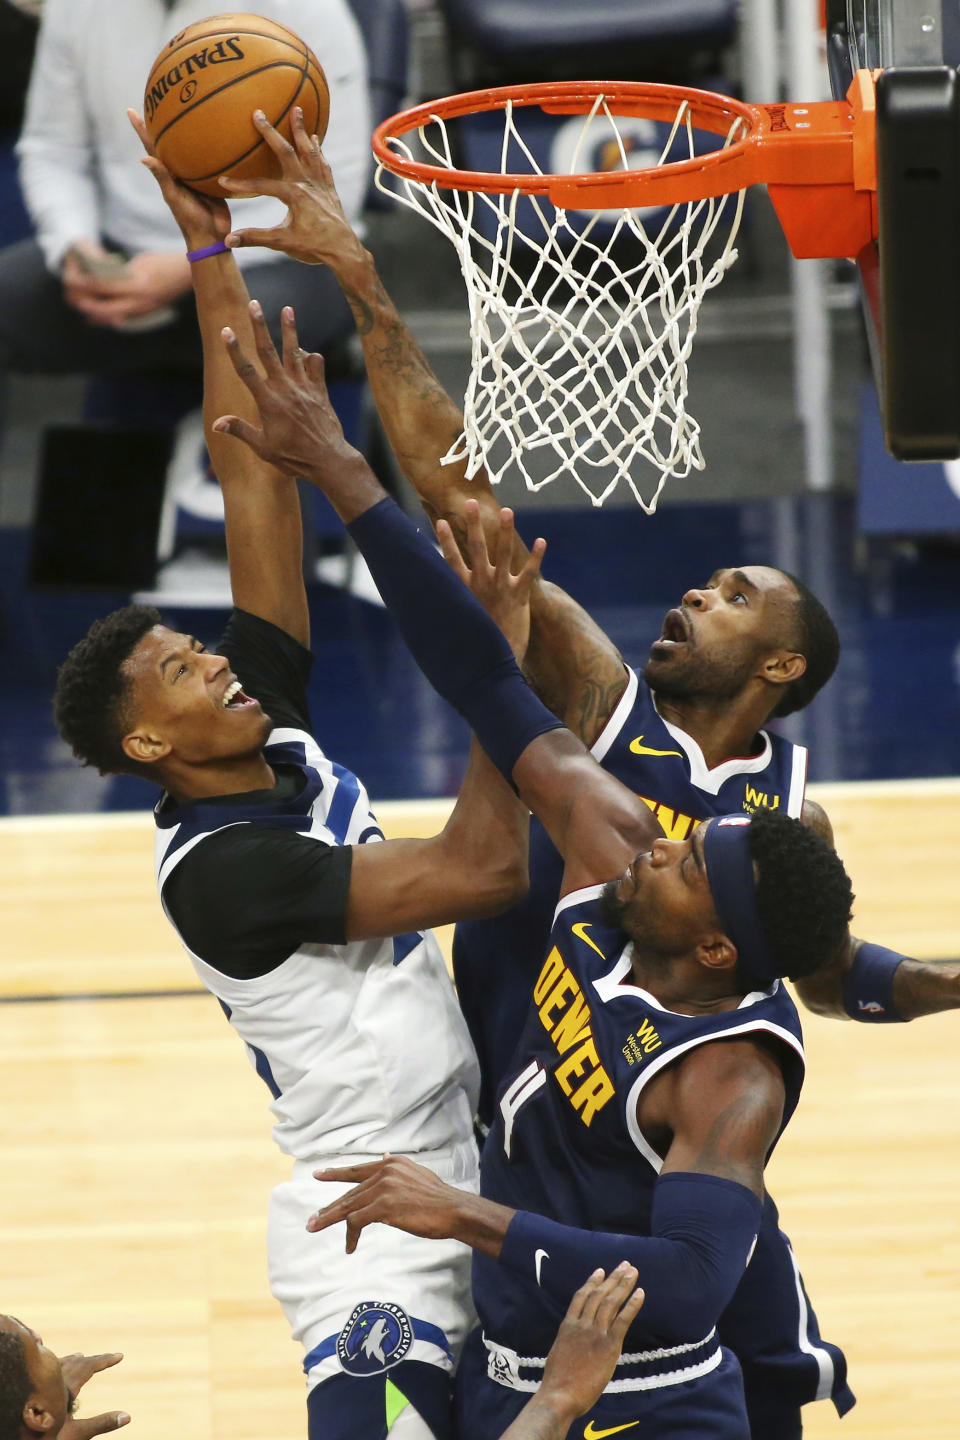 Minnesota Timberwolves Jarrett Culver (23) shoots against Denver Nuggets guards Paul Milsap (4) and Will Barton in the second quarter during an NBA basketball game, Sunday, Jan. 3, 2021, in Minneapolis. (AP Photo/Andy Clayton-King)